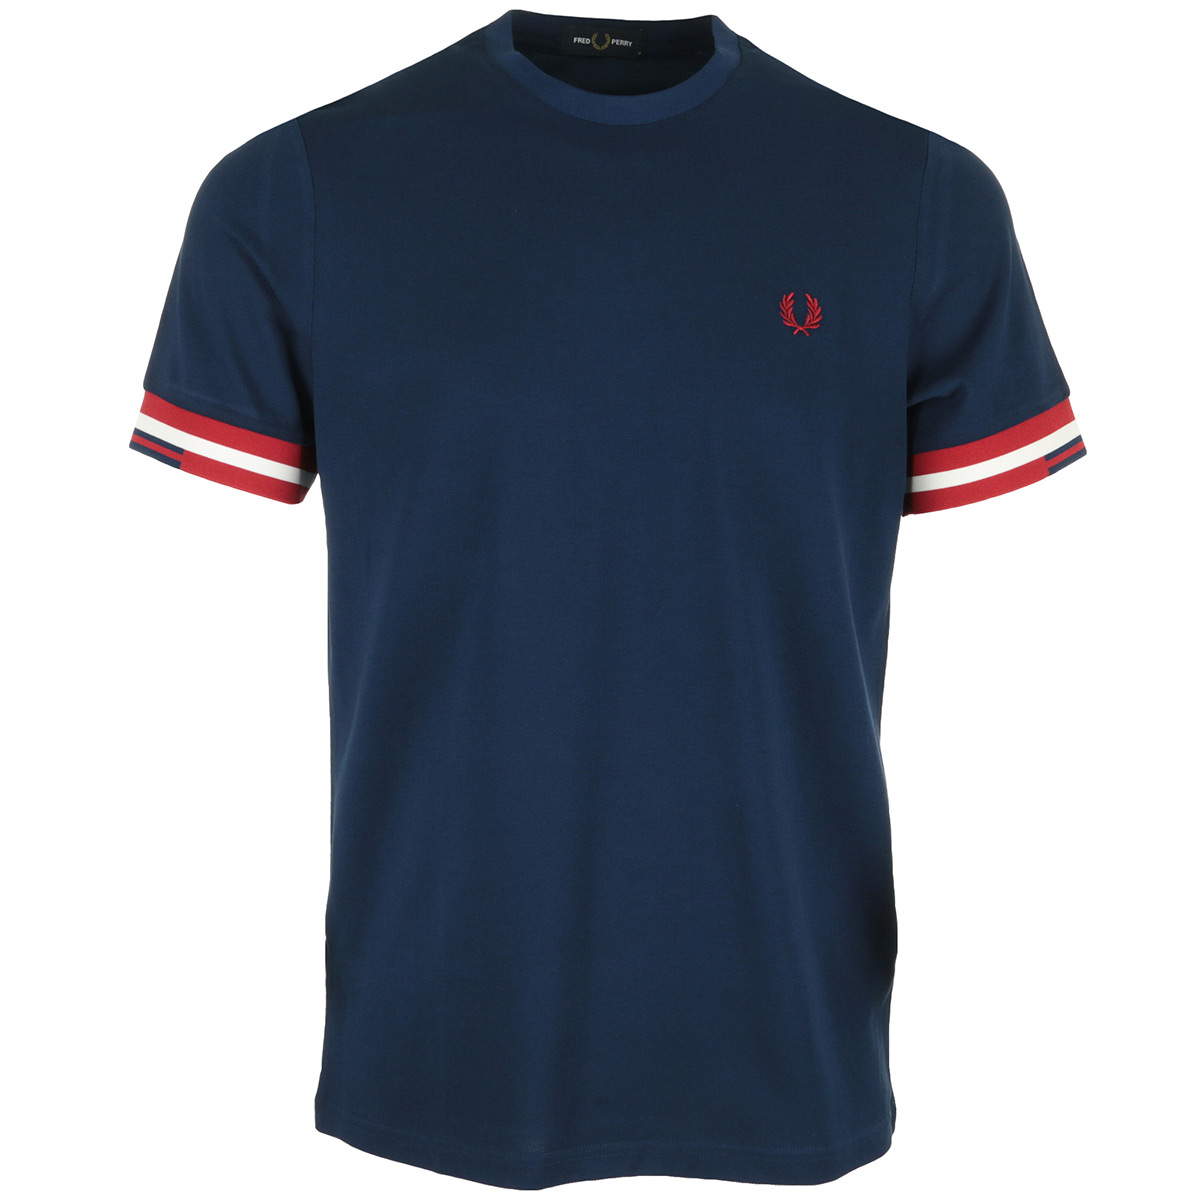 Fred Perry "Abstract Cuff T-Shirt"